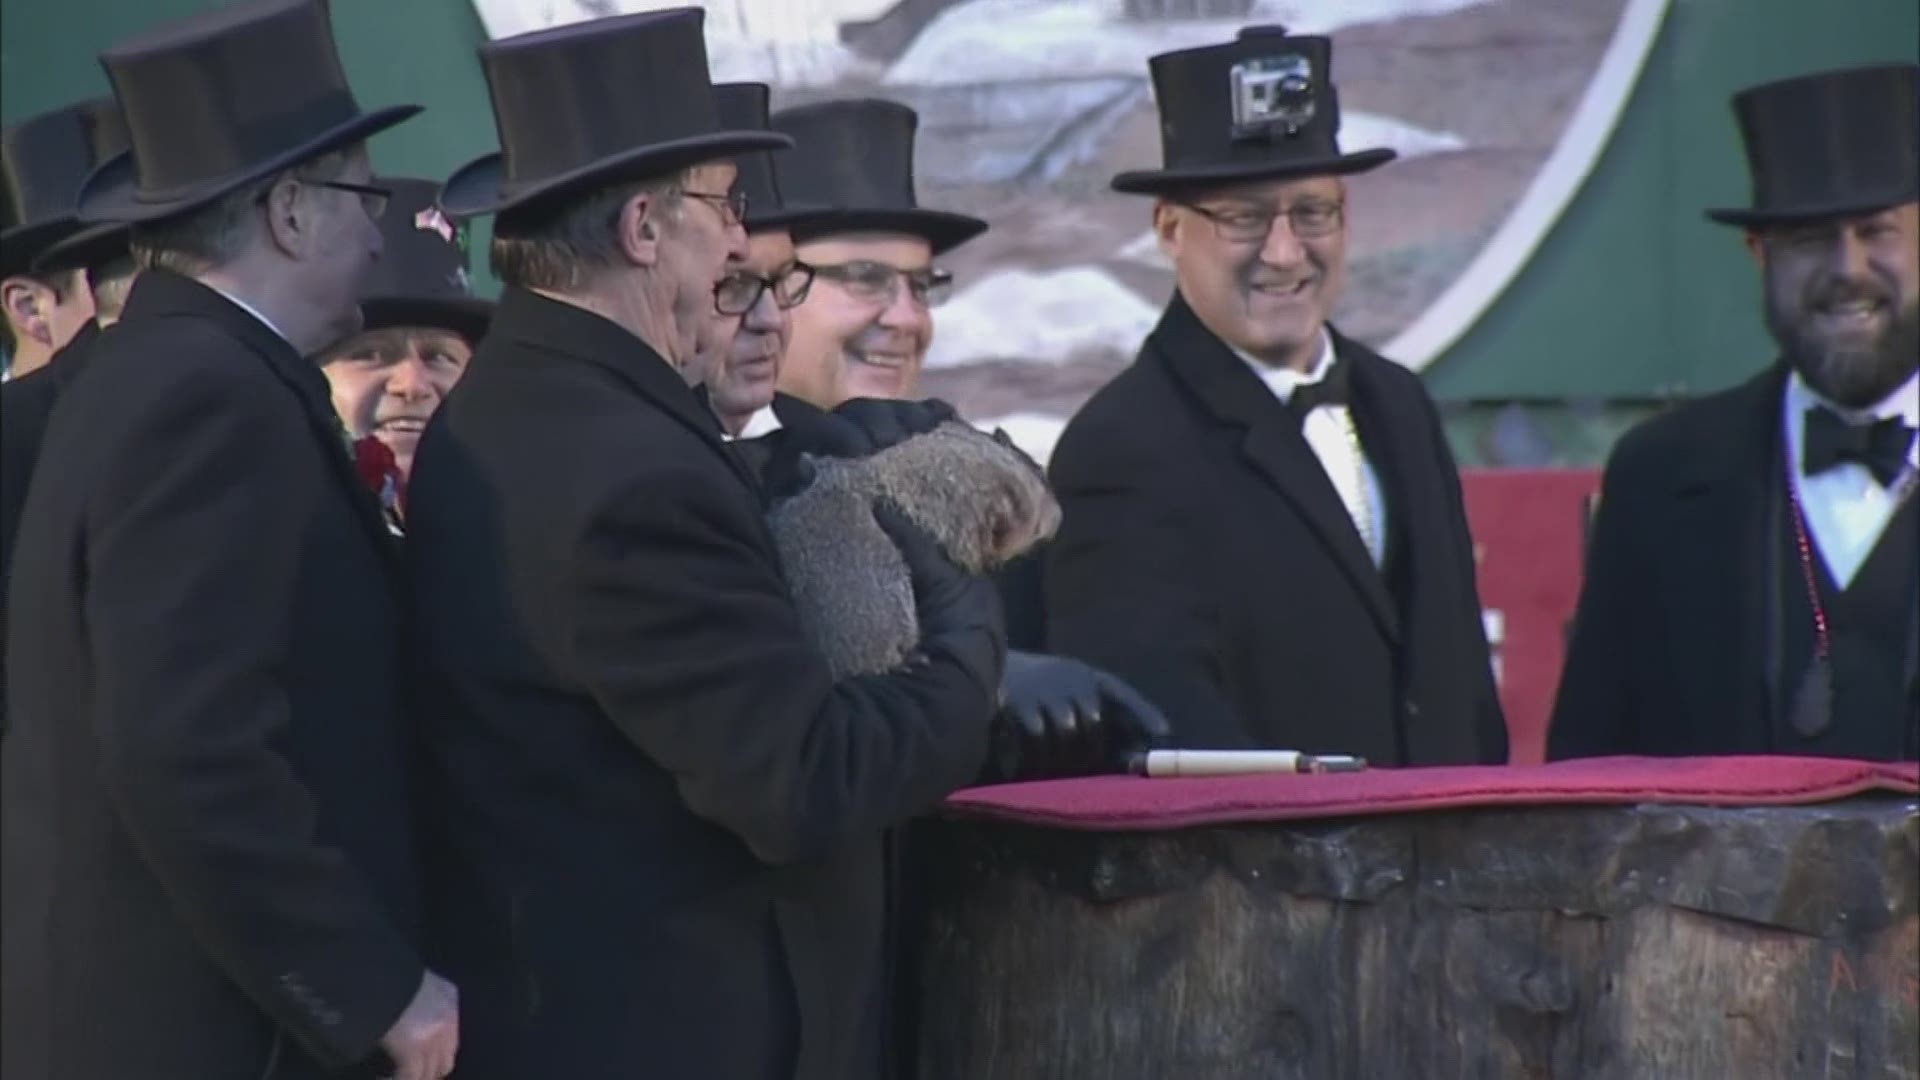 10TV's Mackenzie Bart looks at the data and talked to the experts to determine which groundhog is more accurate: Ohio's Buckeye Chuck or Punxsutawney Phil?